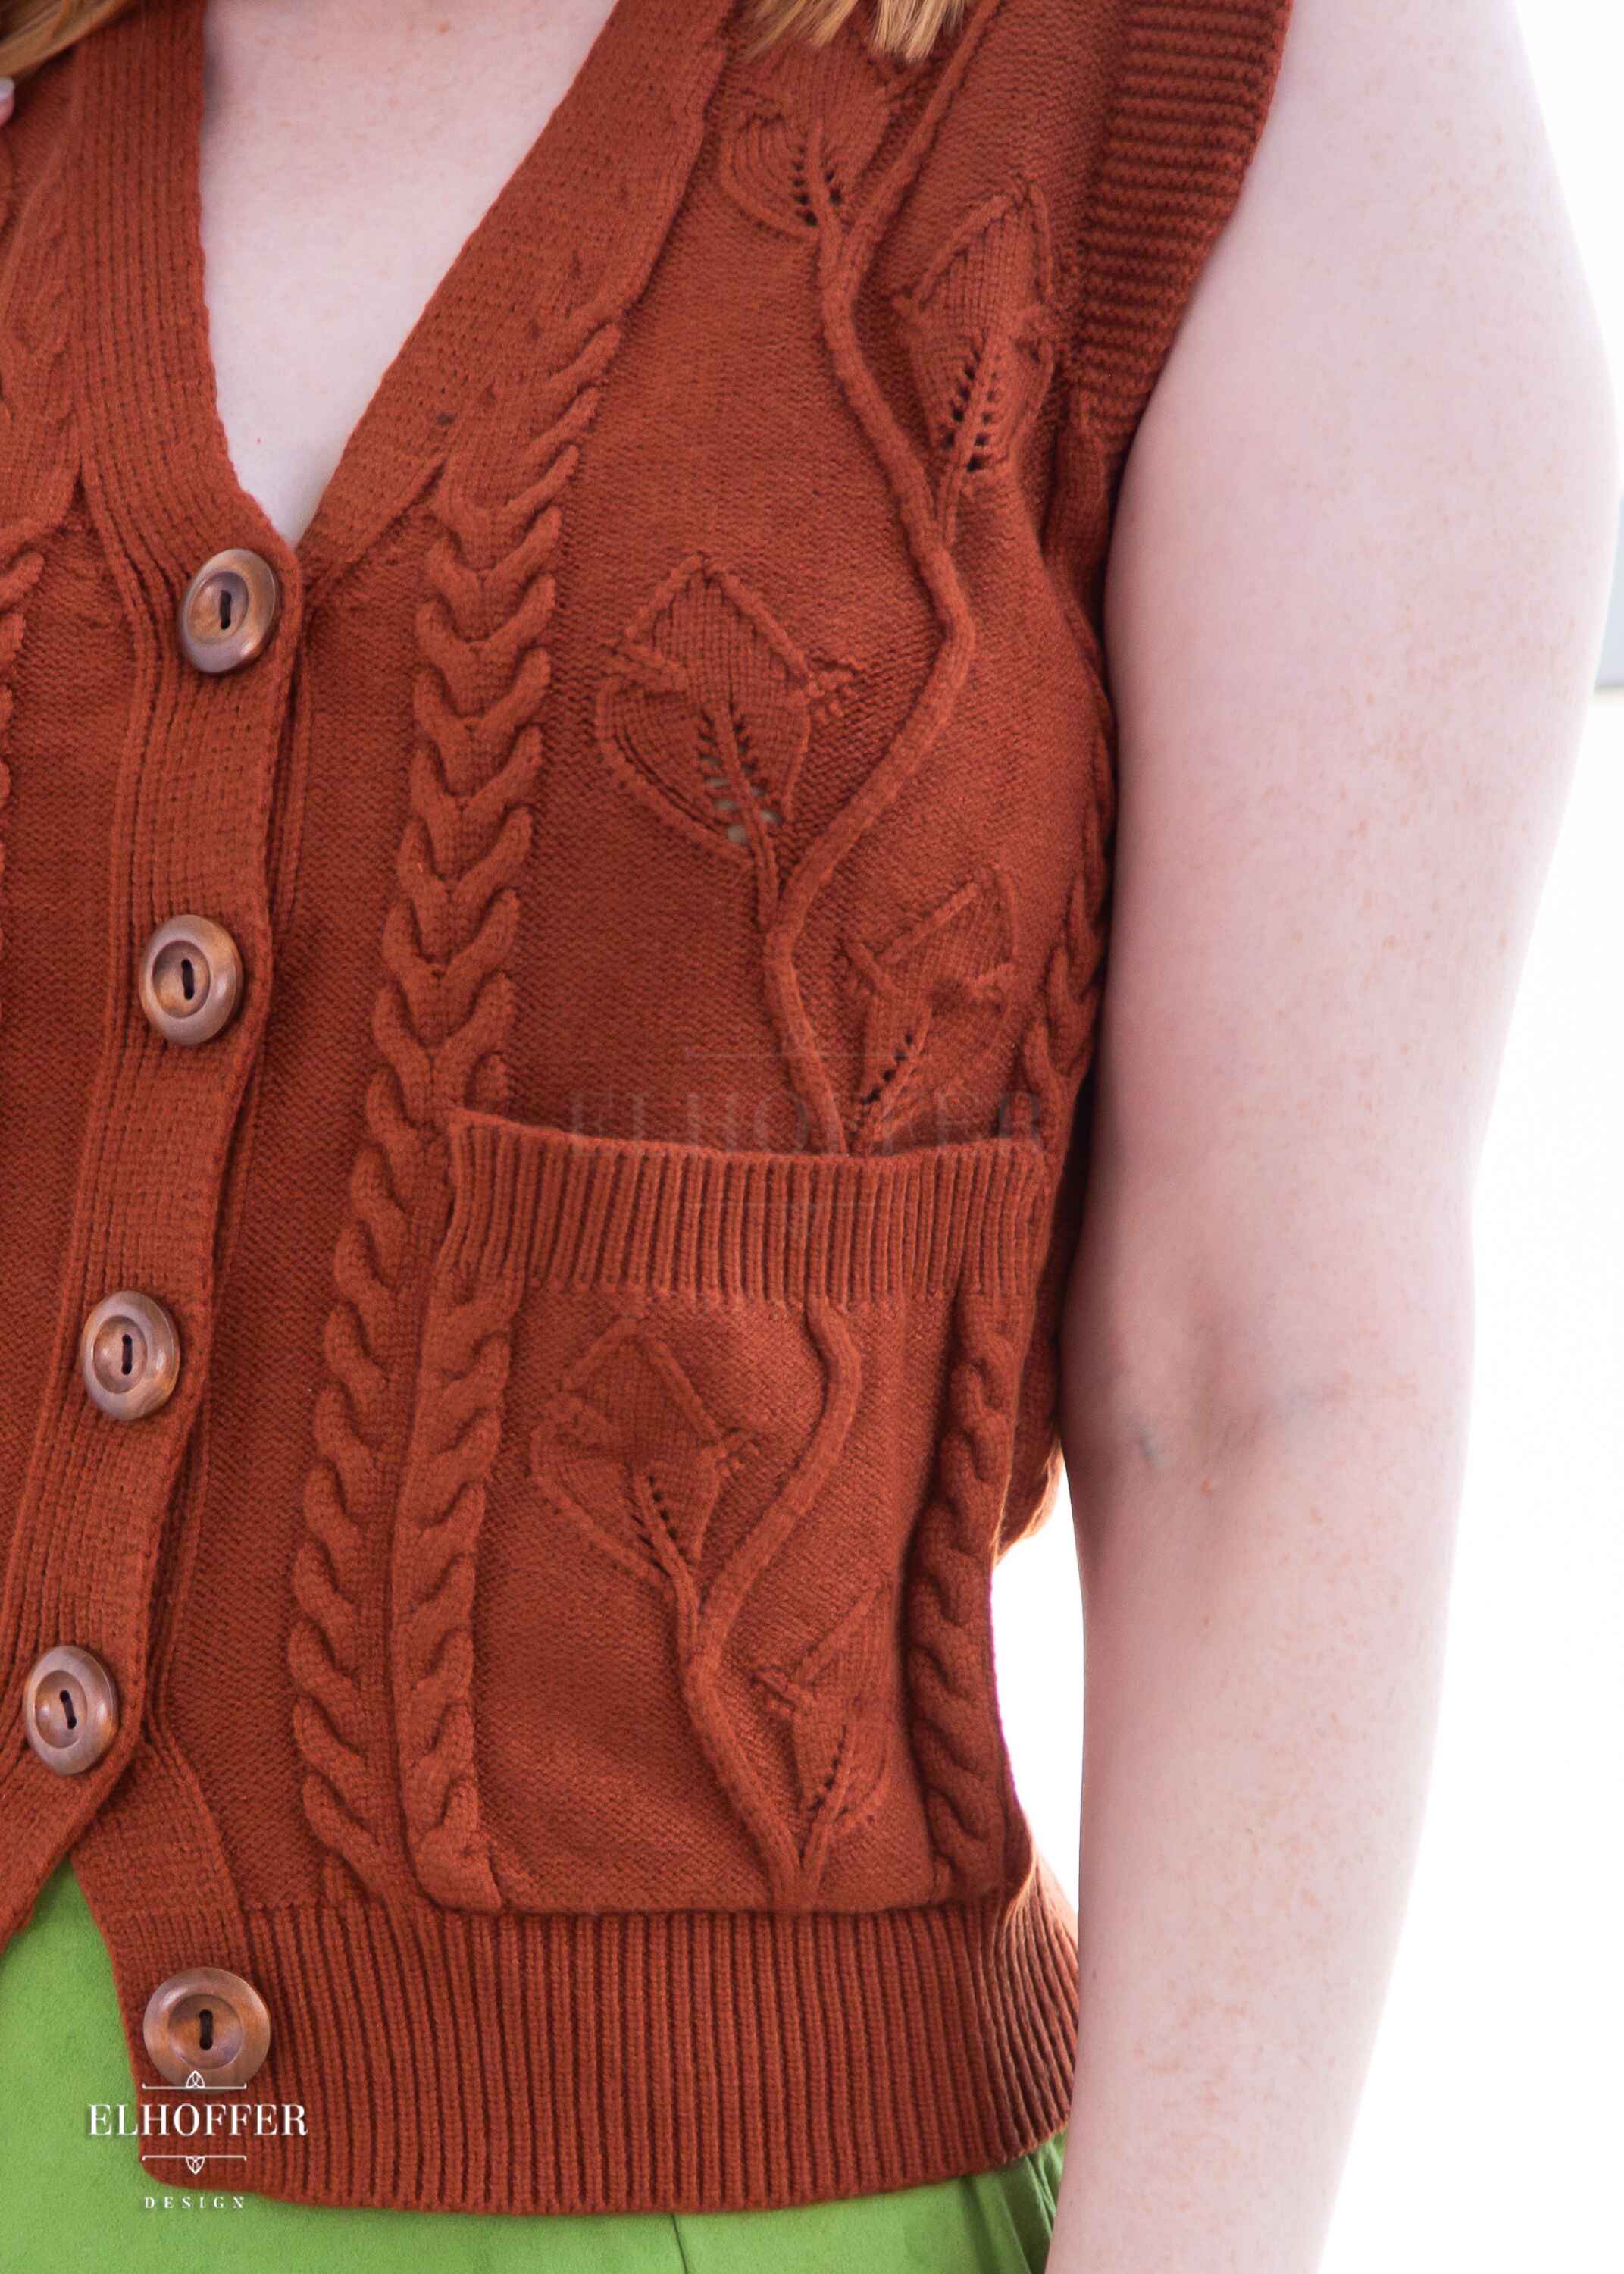 A closeup of the leafy vine and cable knit pattern in the vest